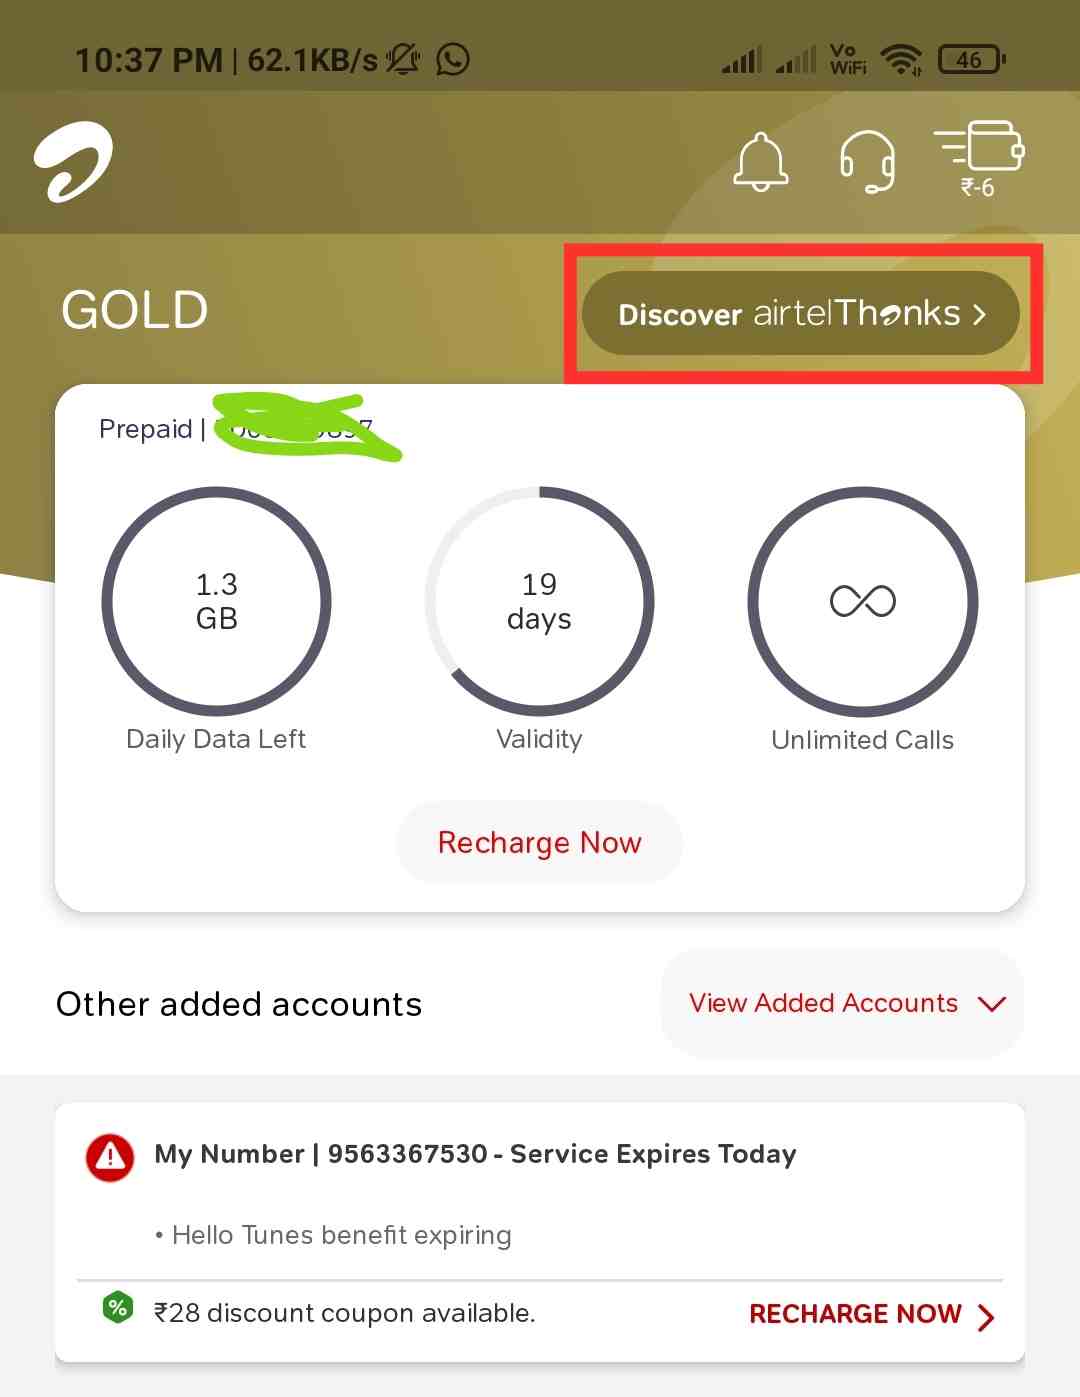 Airtel Thanks CoinSwitch Kuber Coupon Free - GET ₹100 Crypto Balance